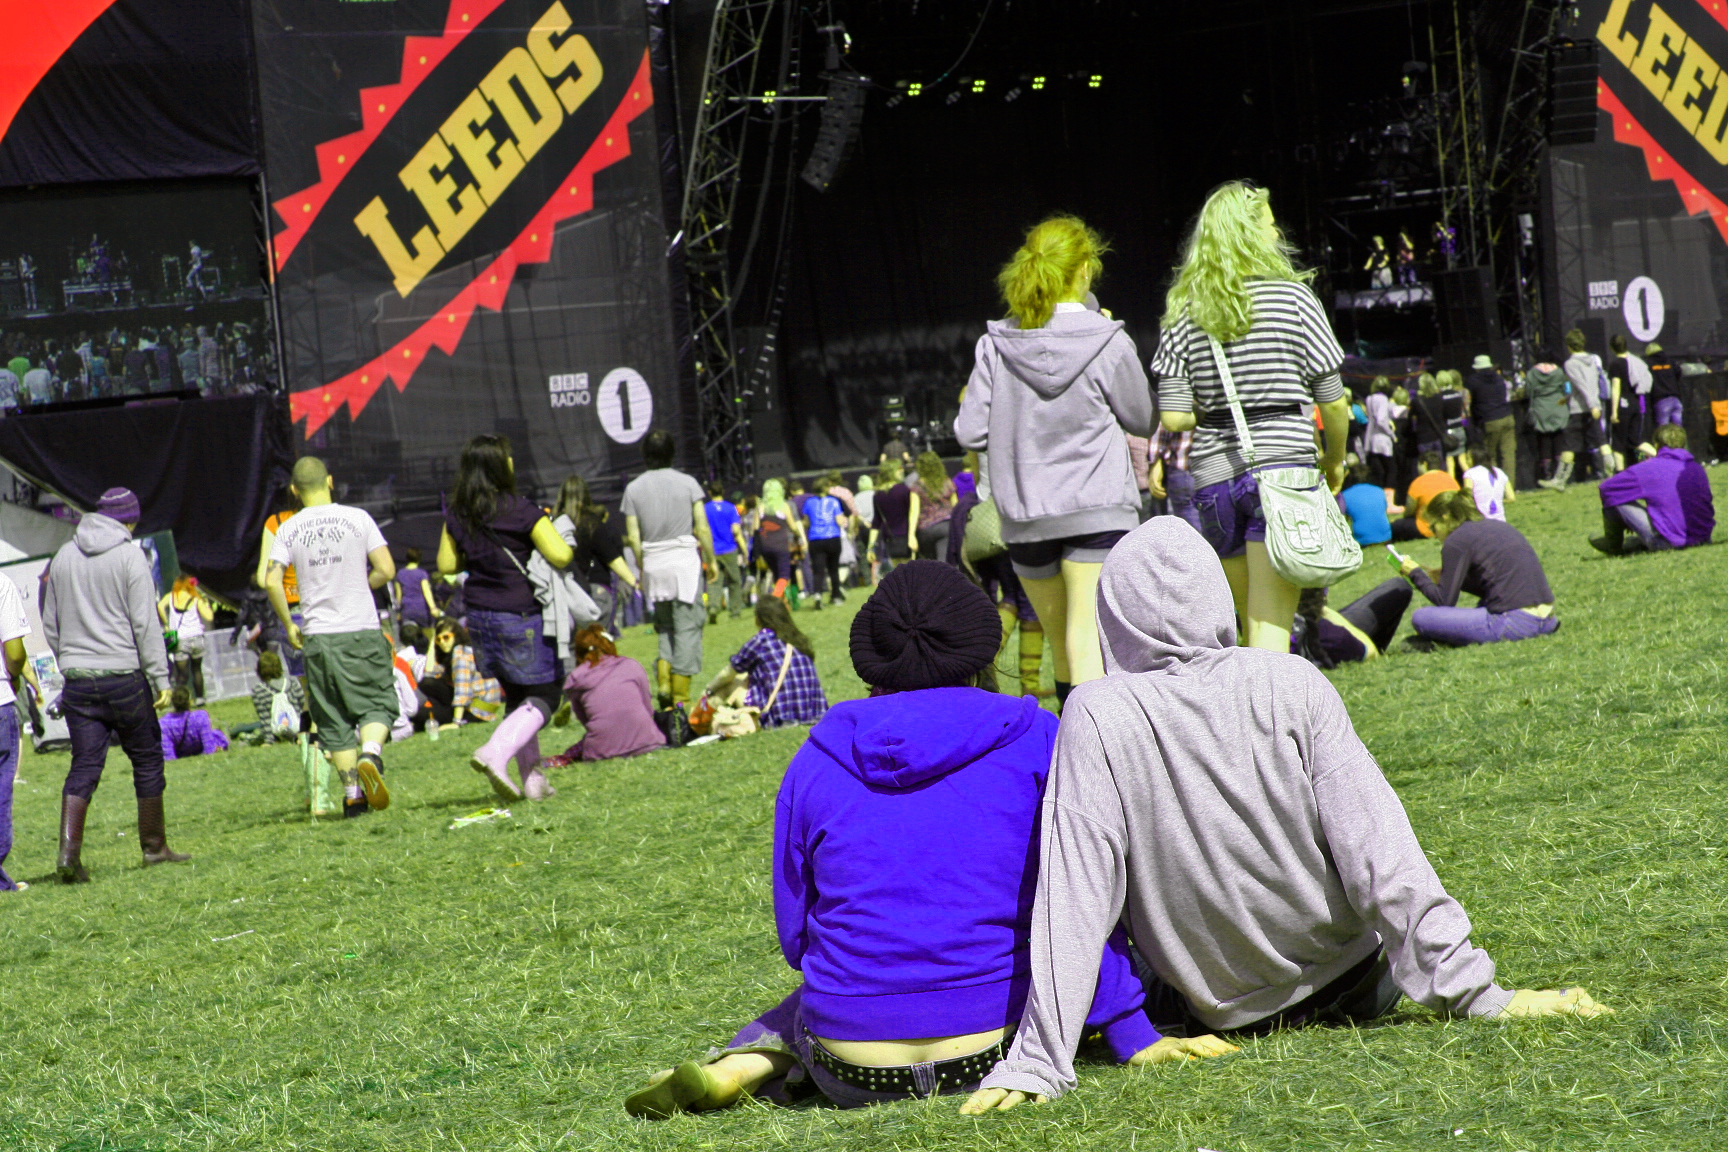 More Than 200 Acts Confirmed for Reading and Leeds Festivals